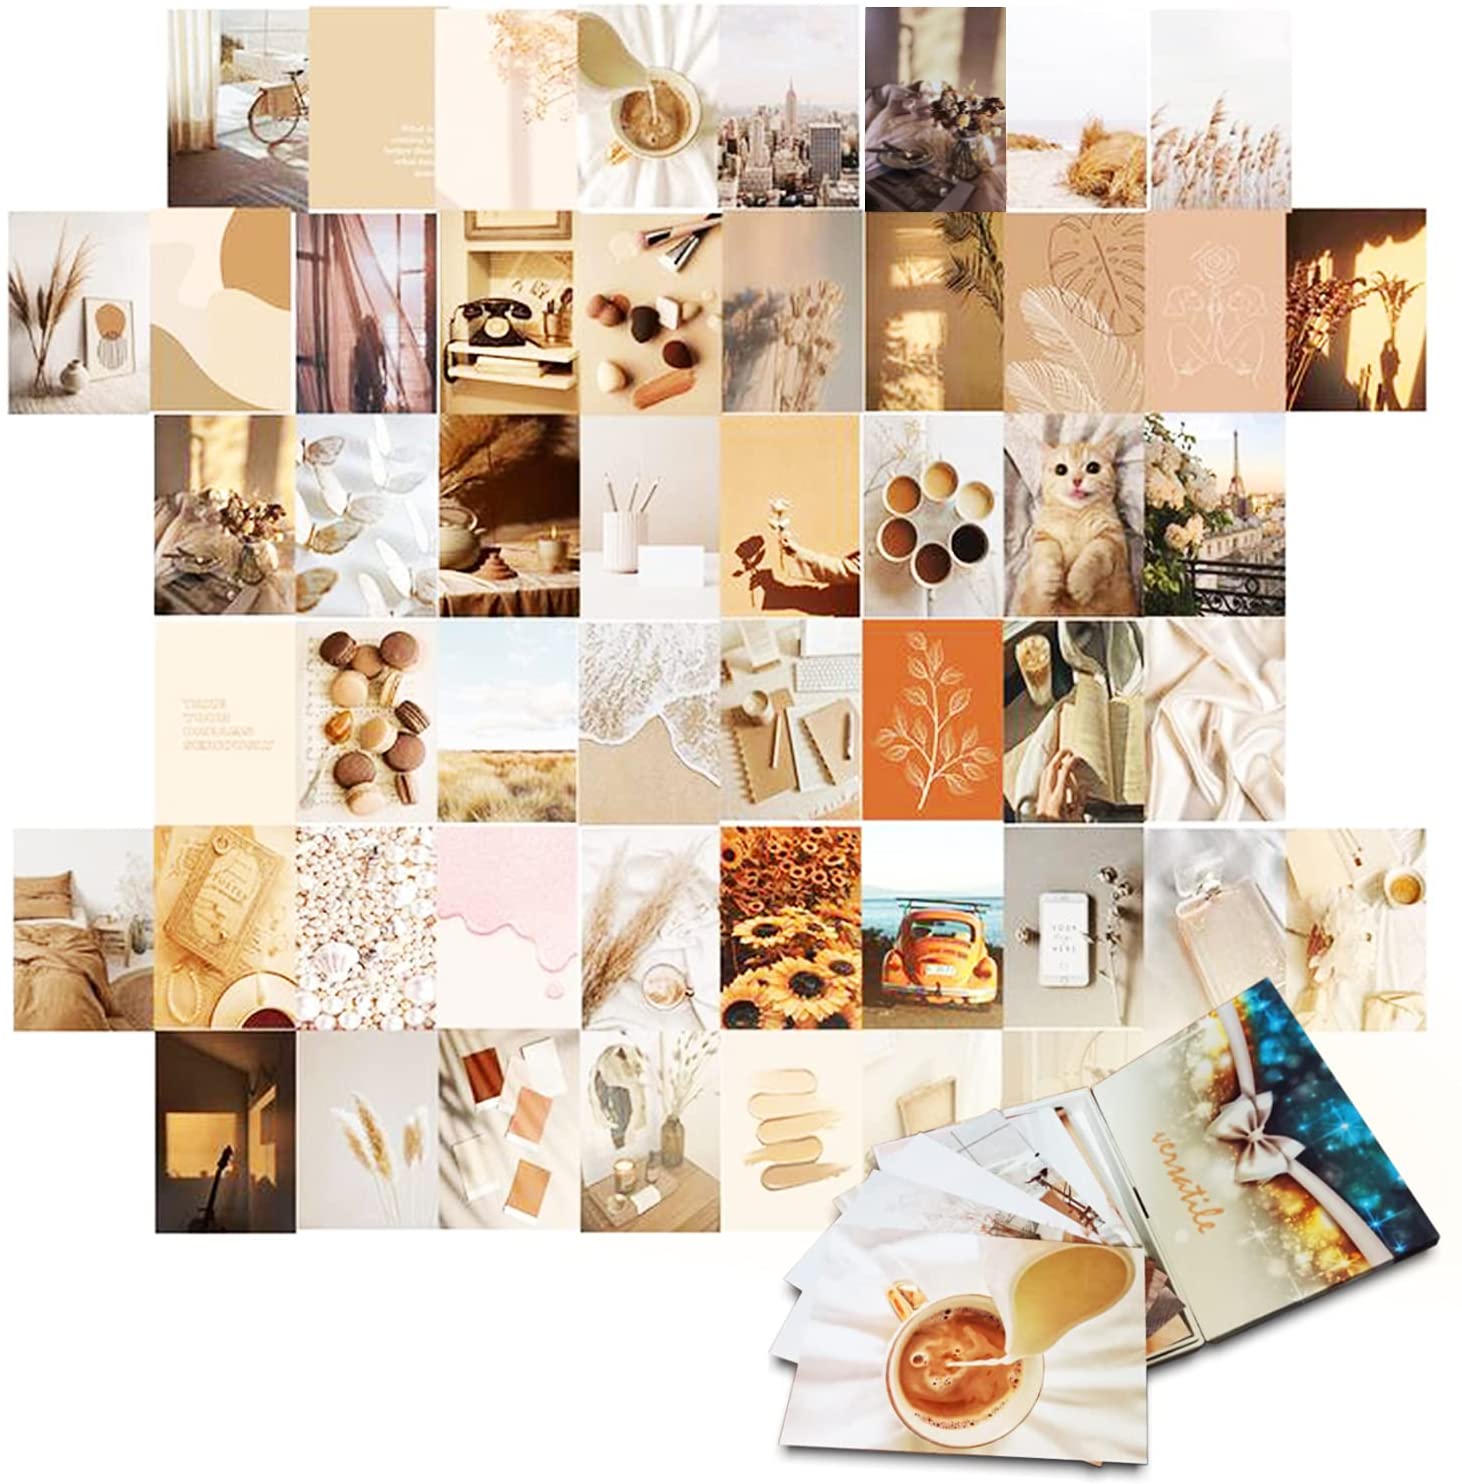 Buy ULODIMI Aesthetic Wall Collage Kit 50PCS 4x6 inch Beige Beach Boho Aesthetic Picture Photo Aesthetic Room Decor for Teen Girls Online in Japan. B0948L13YH